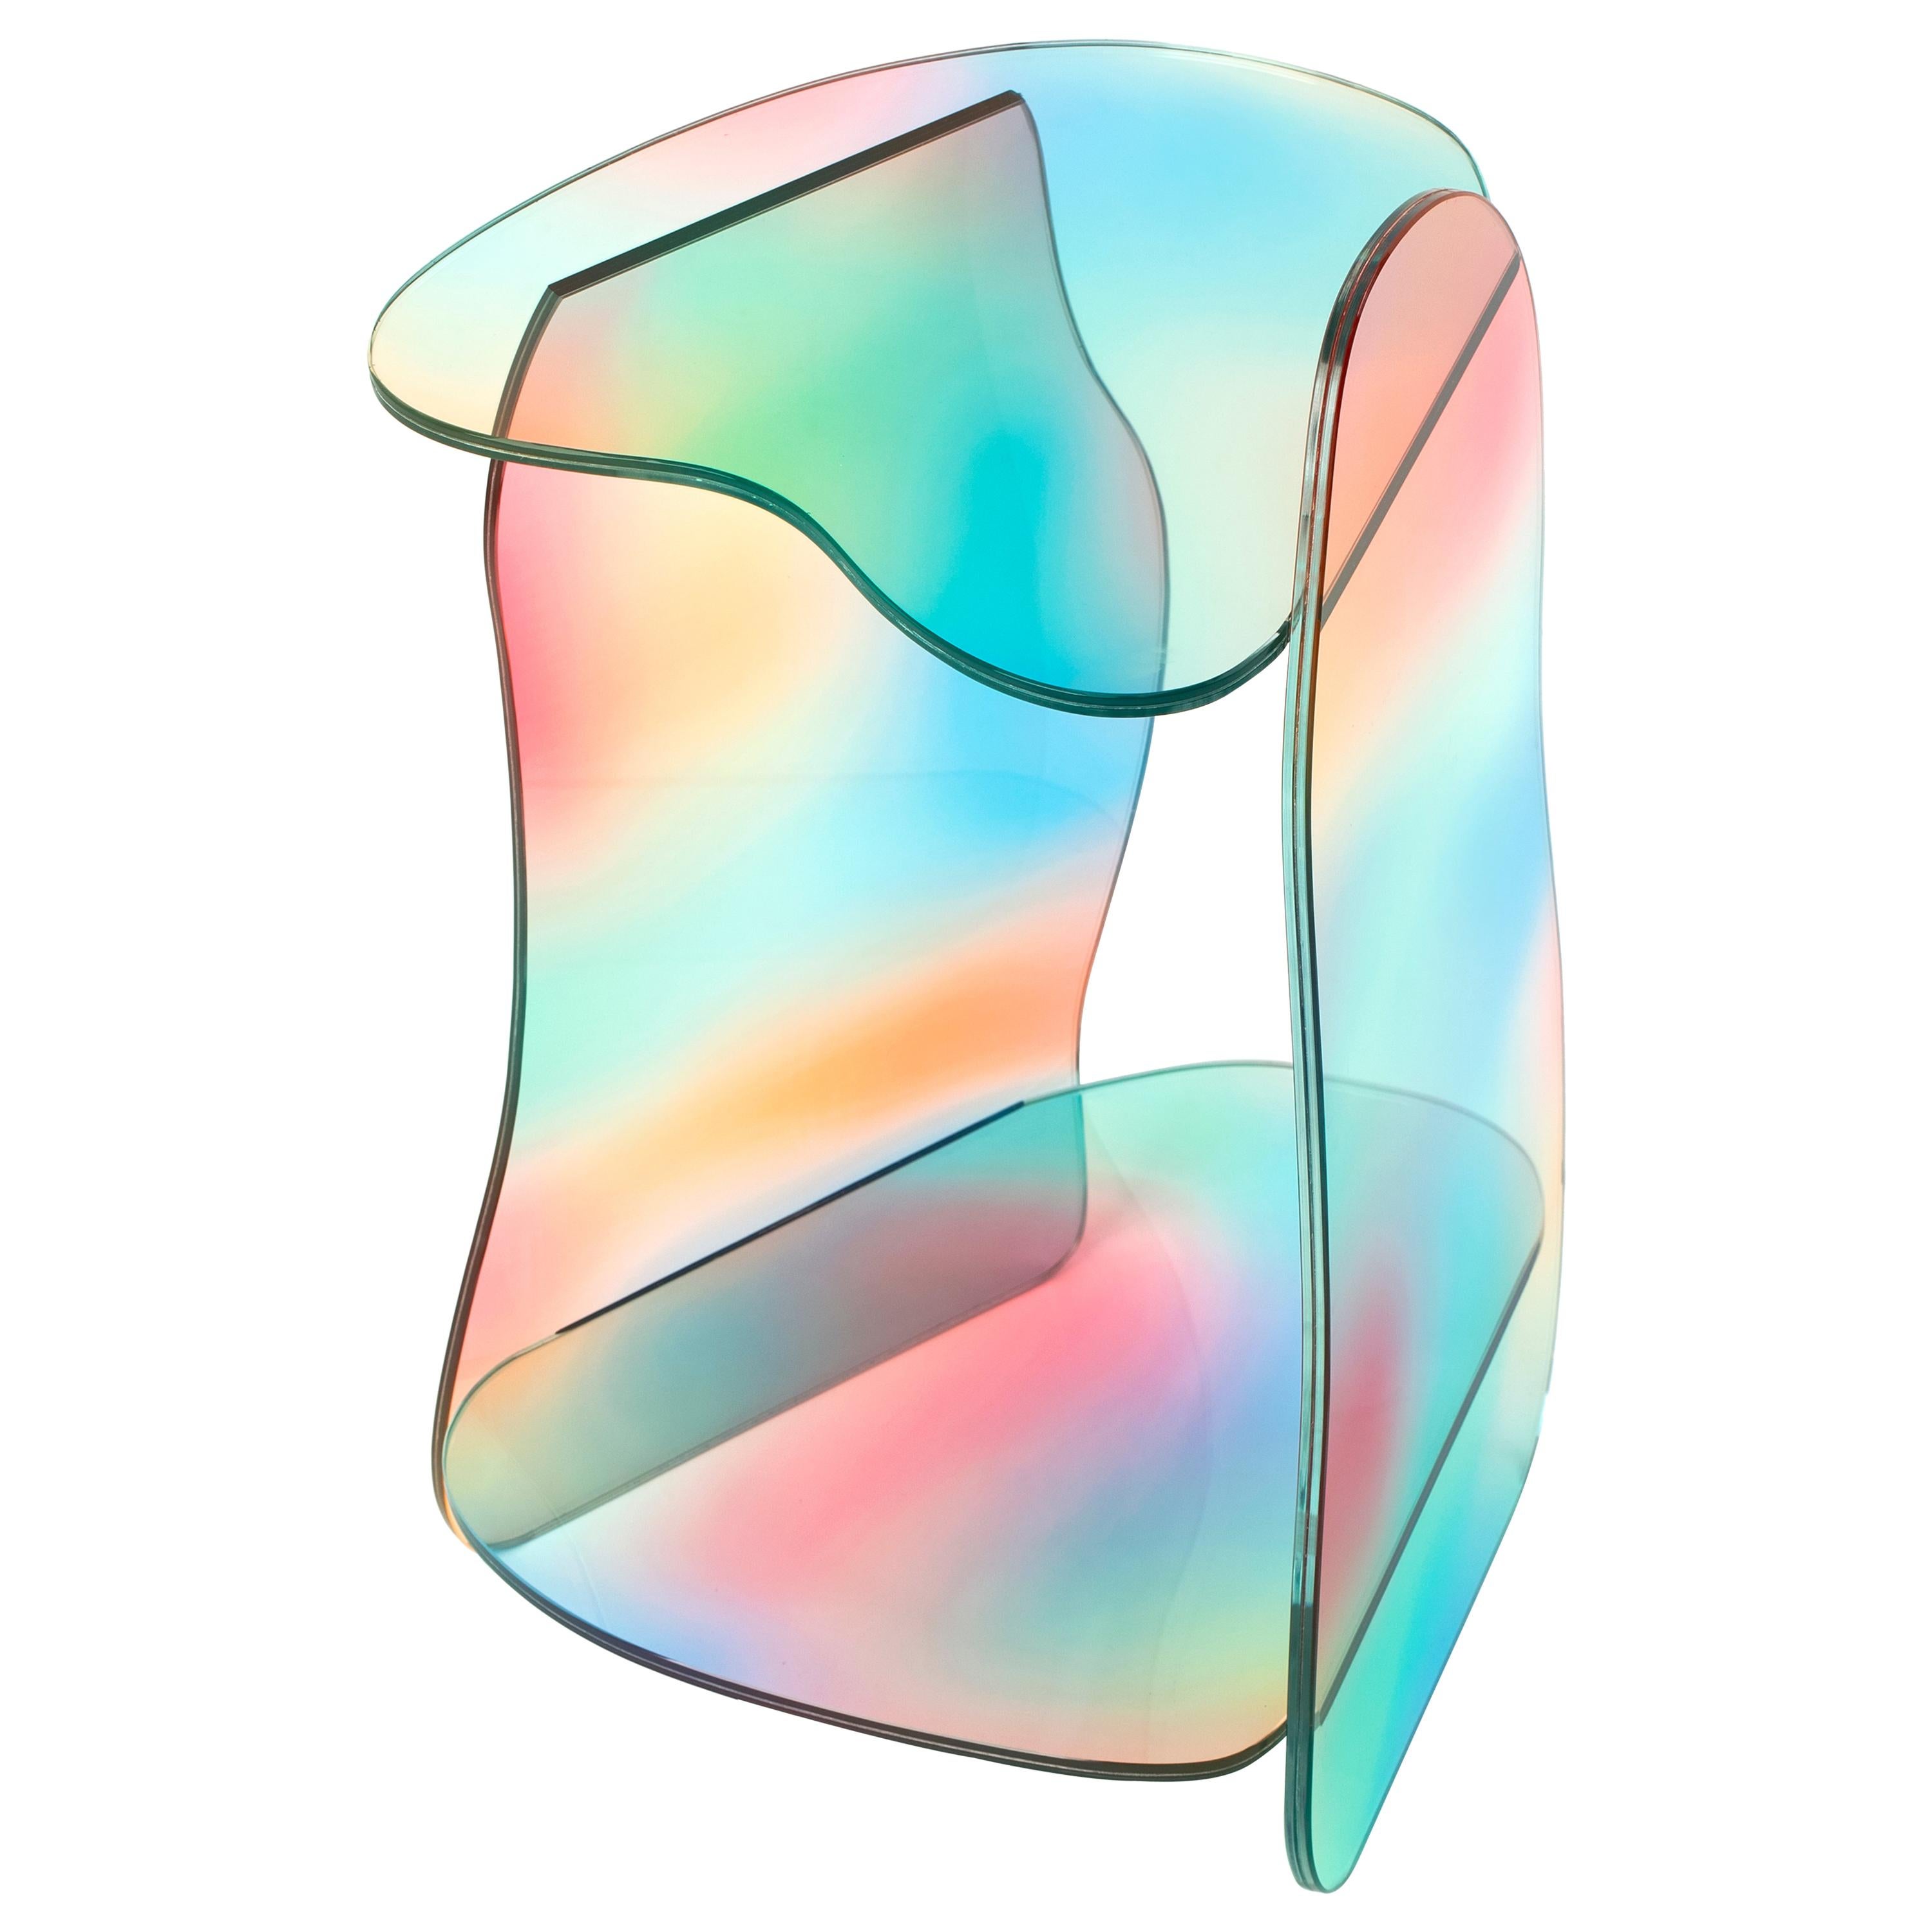 Dolmen Dichroic Glass Side Table Sculpted by Studio-Chacha